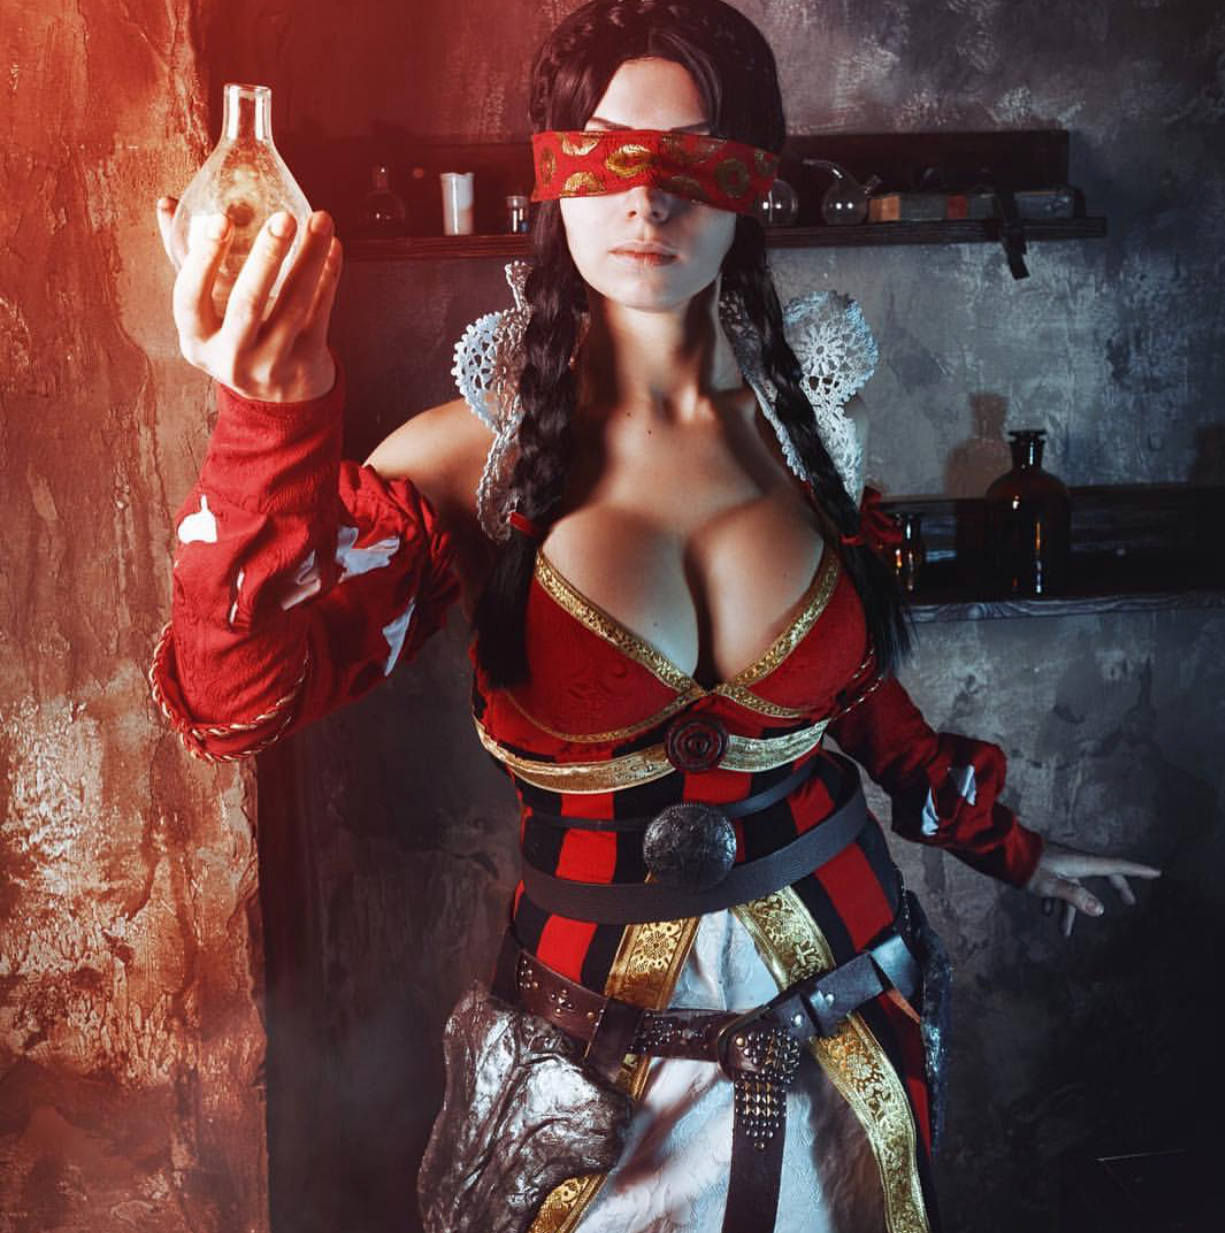 random-witcher-3-cosplay-for-a-good-start-of-the-weekend-ftw-gallery-ebaum-s-world